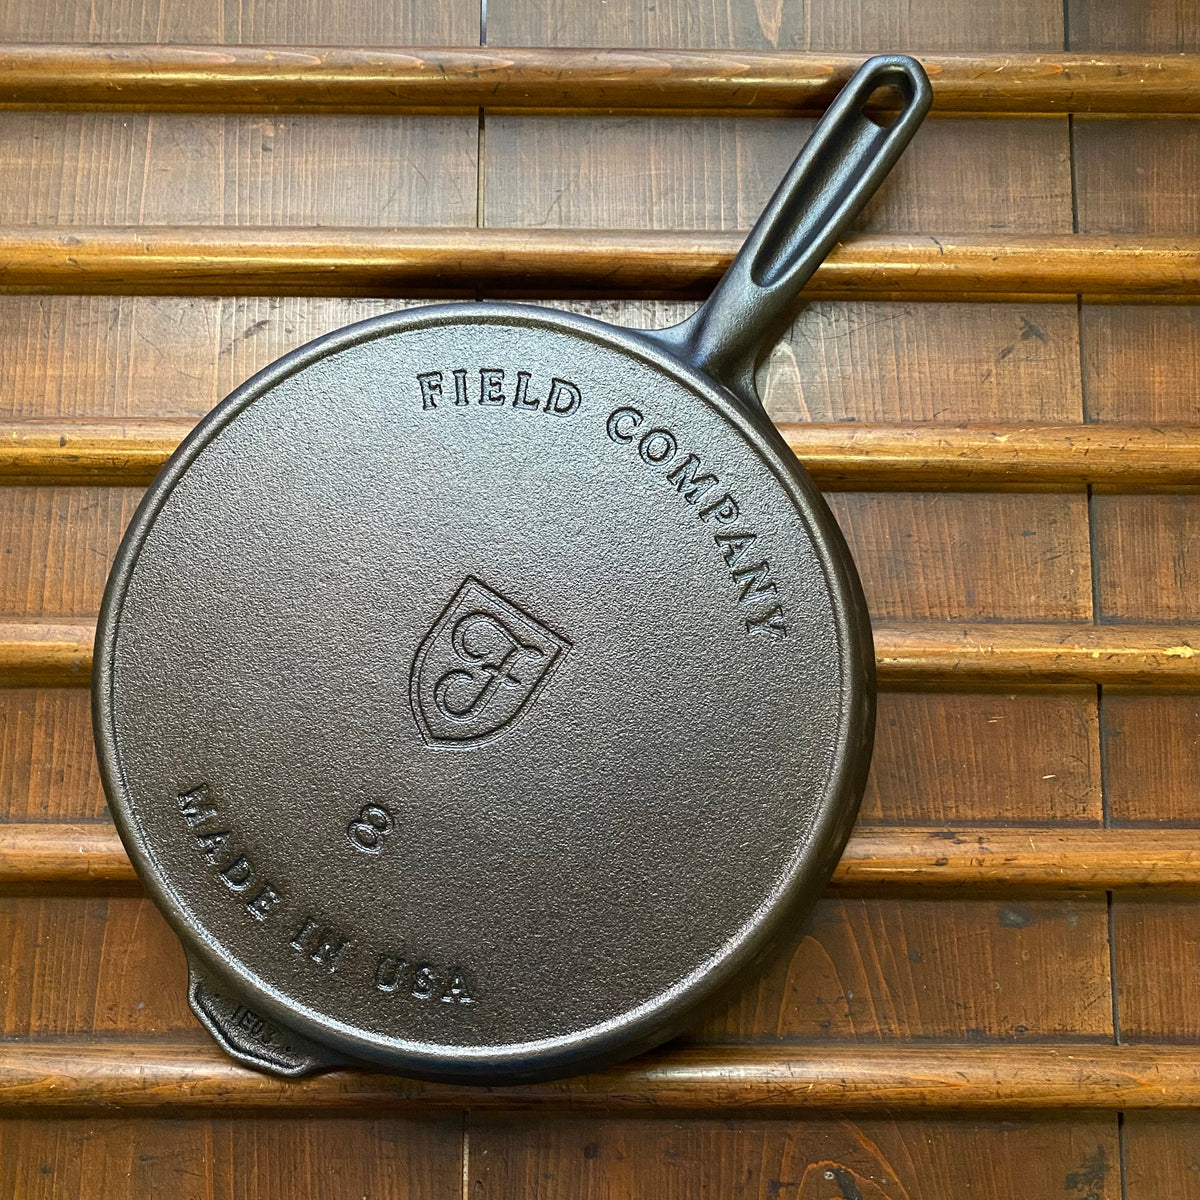 Field Company 10.25 in. Cast Iron Skillet & Lid Set (No. 8)